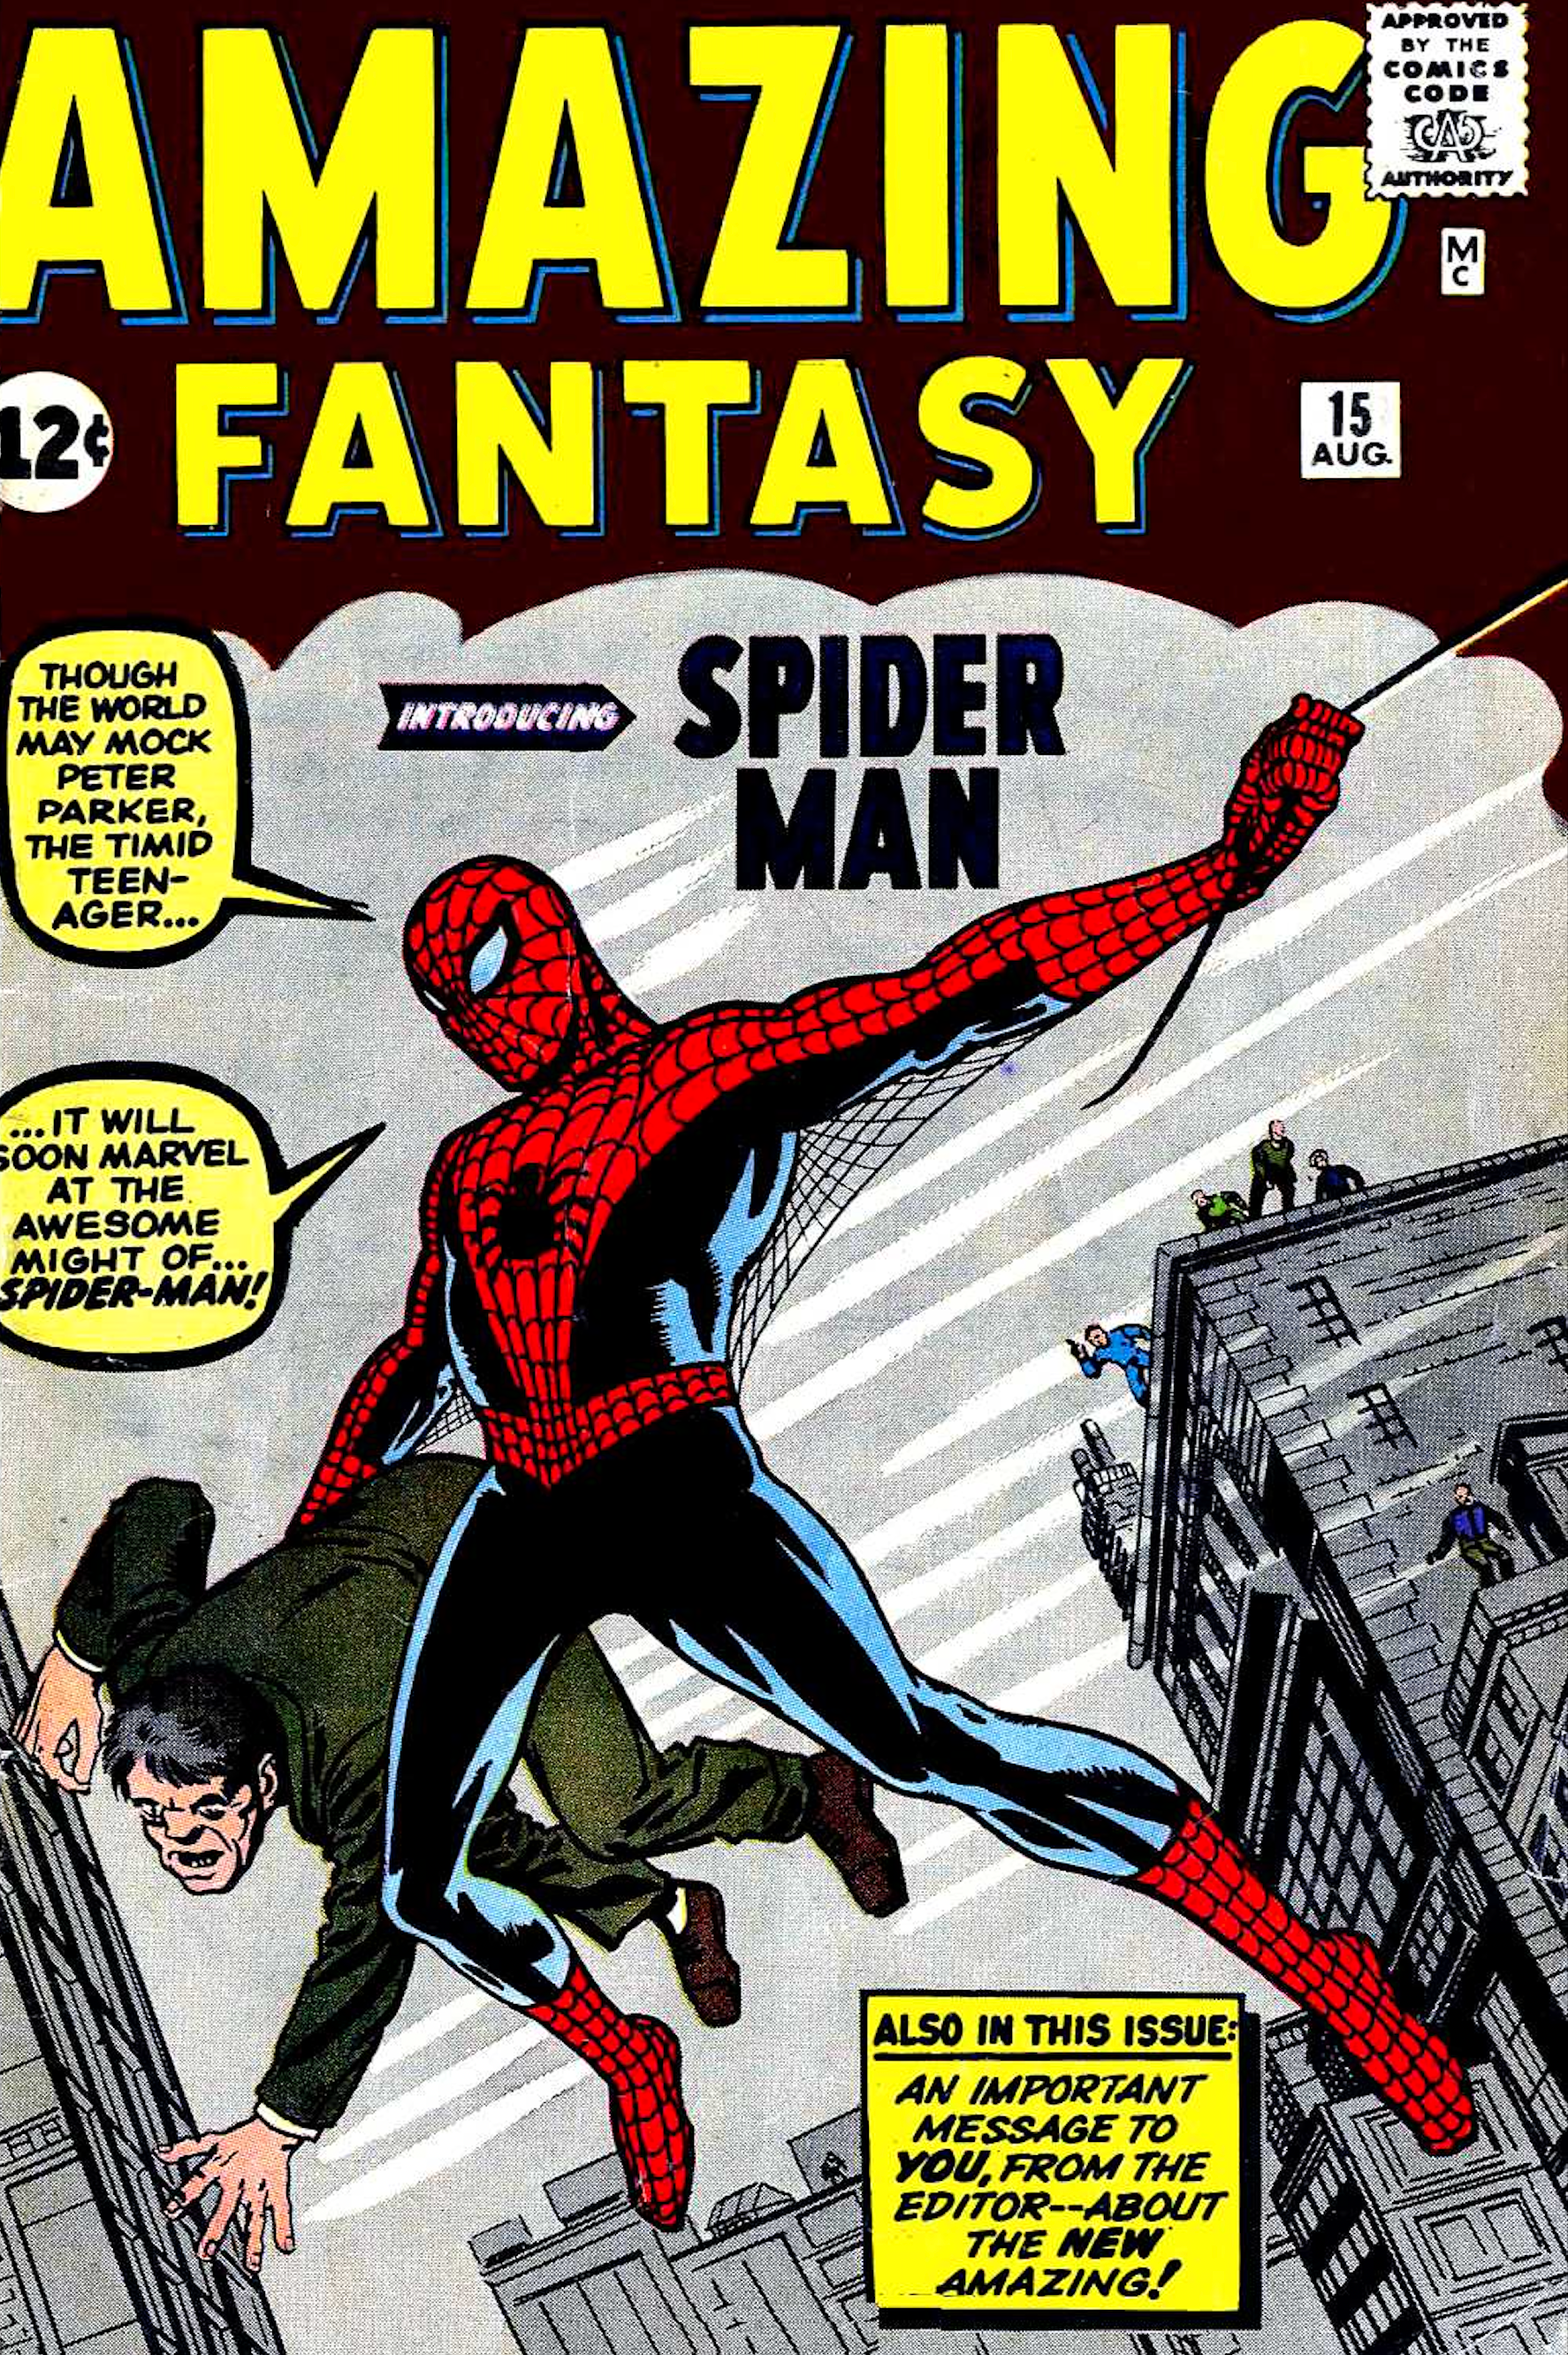 Amazing Fantasy 15 cover with Spider-Man